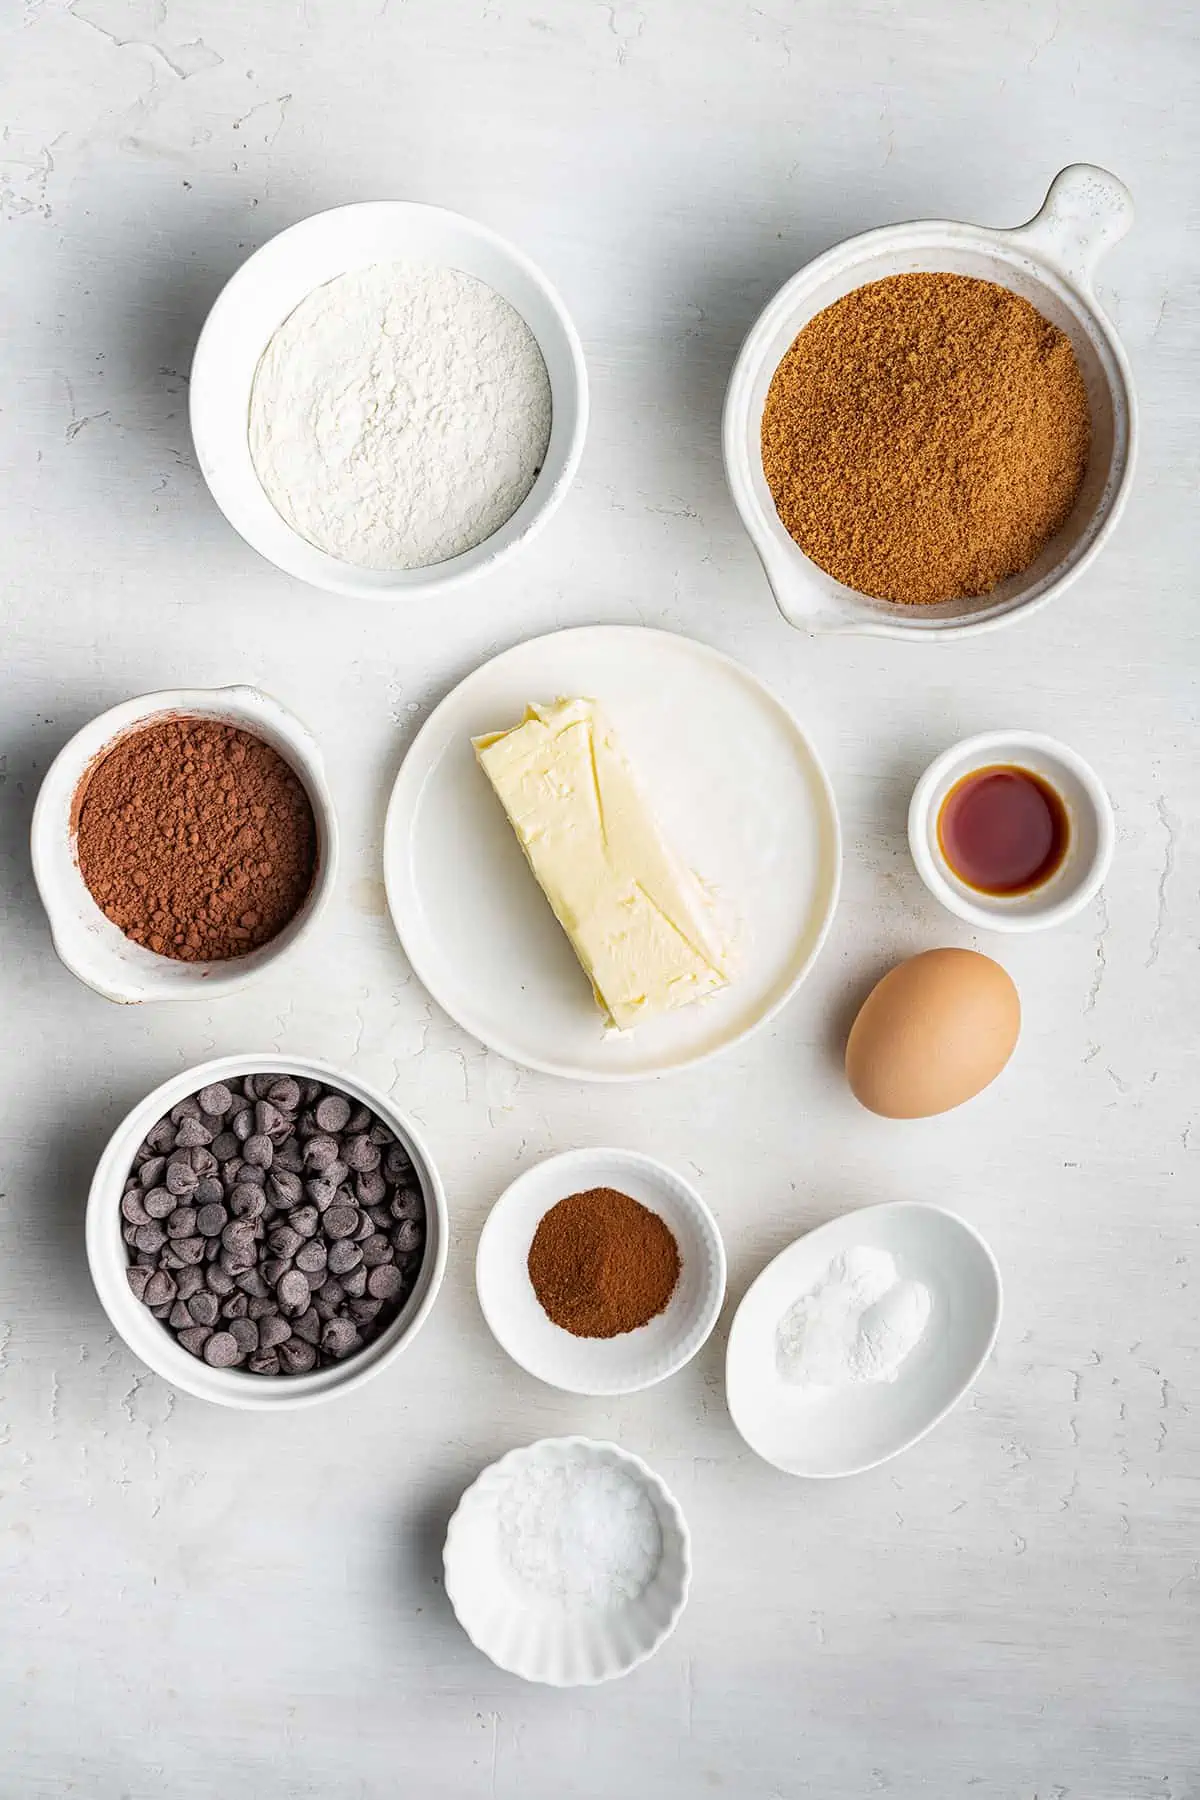 Overhead view of the ingredients for espresso cookies: flour, cocoa powder, espresso powder, chocolate chips, vegan butter, baking powder, baking soda, salt, vanilla extract, and an egg